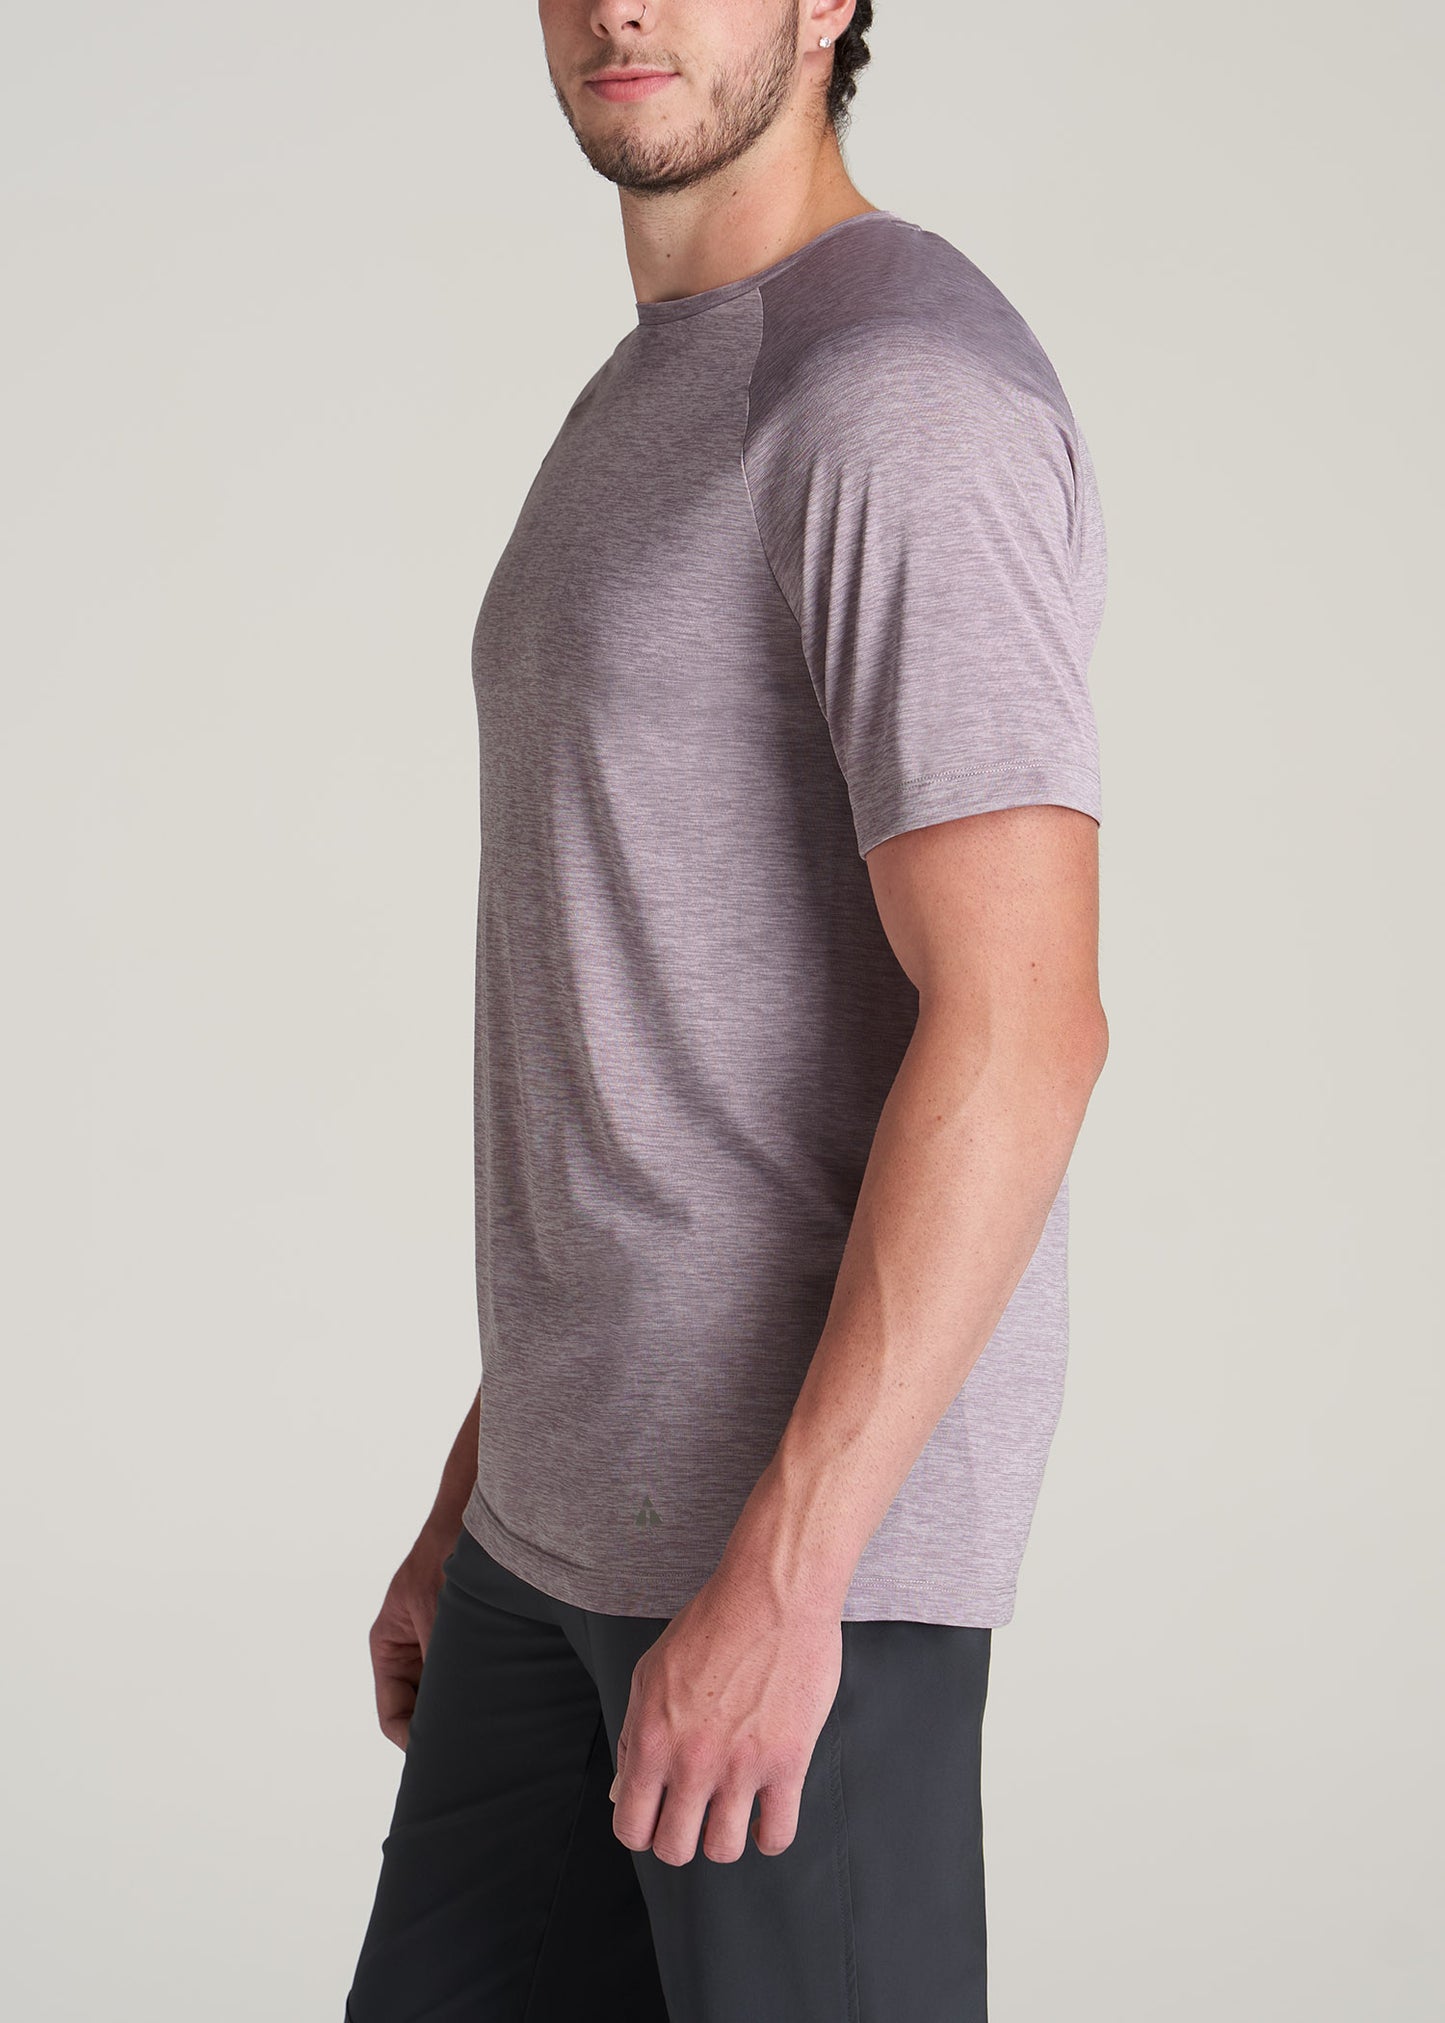 Side view of a tall man wearing an athletic wear t-shirt in lavender.